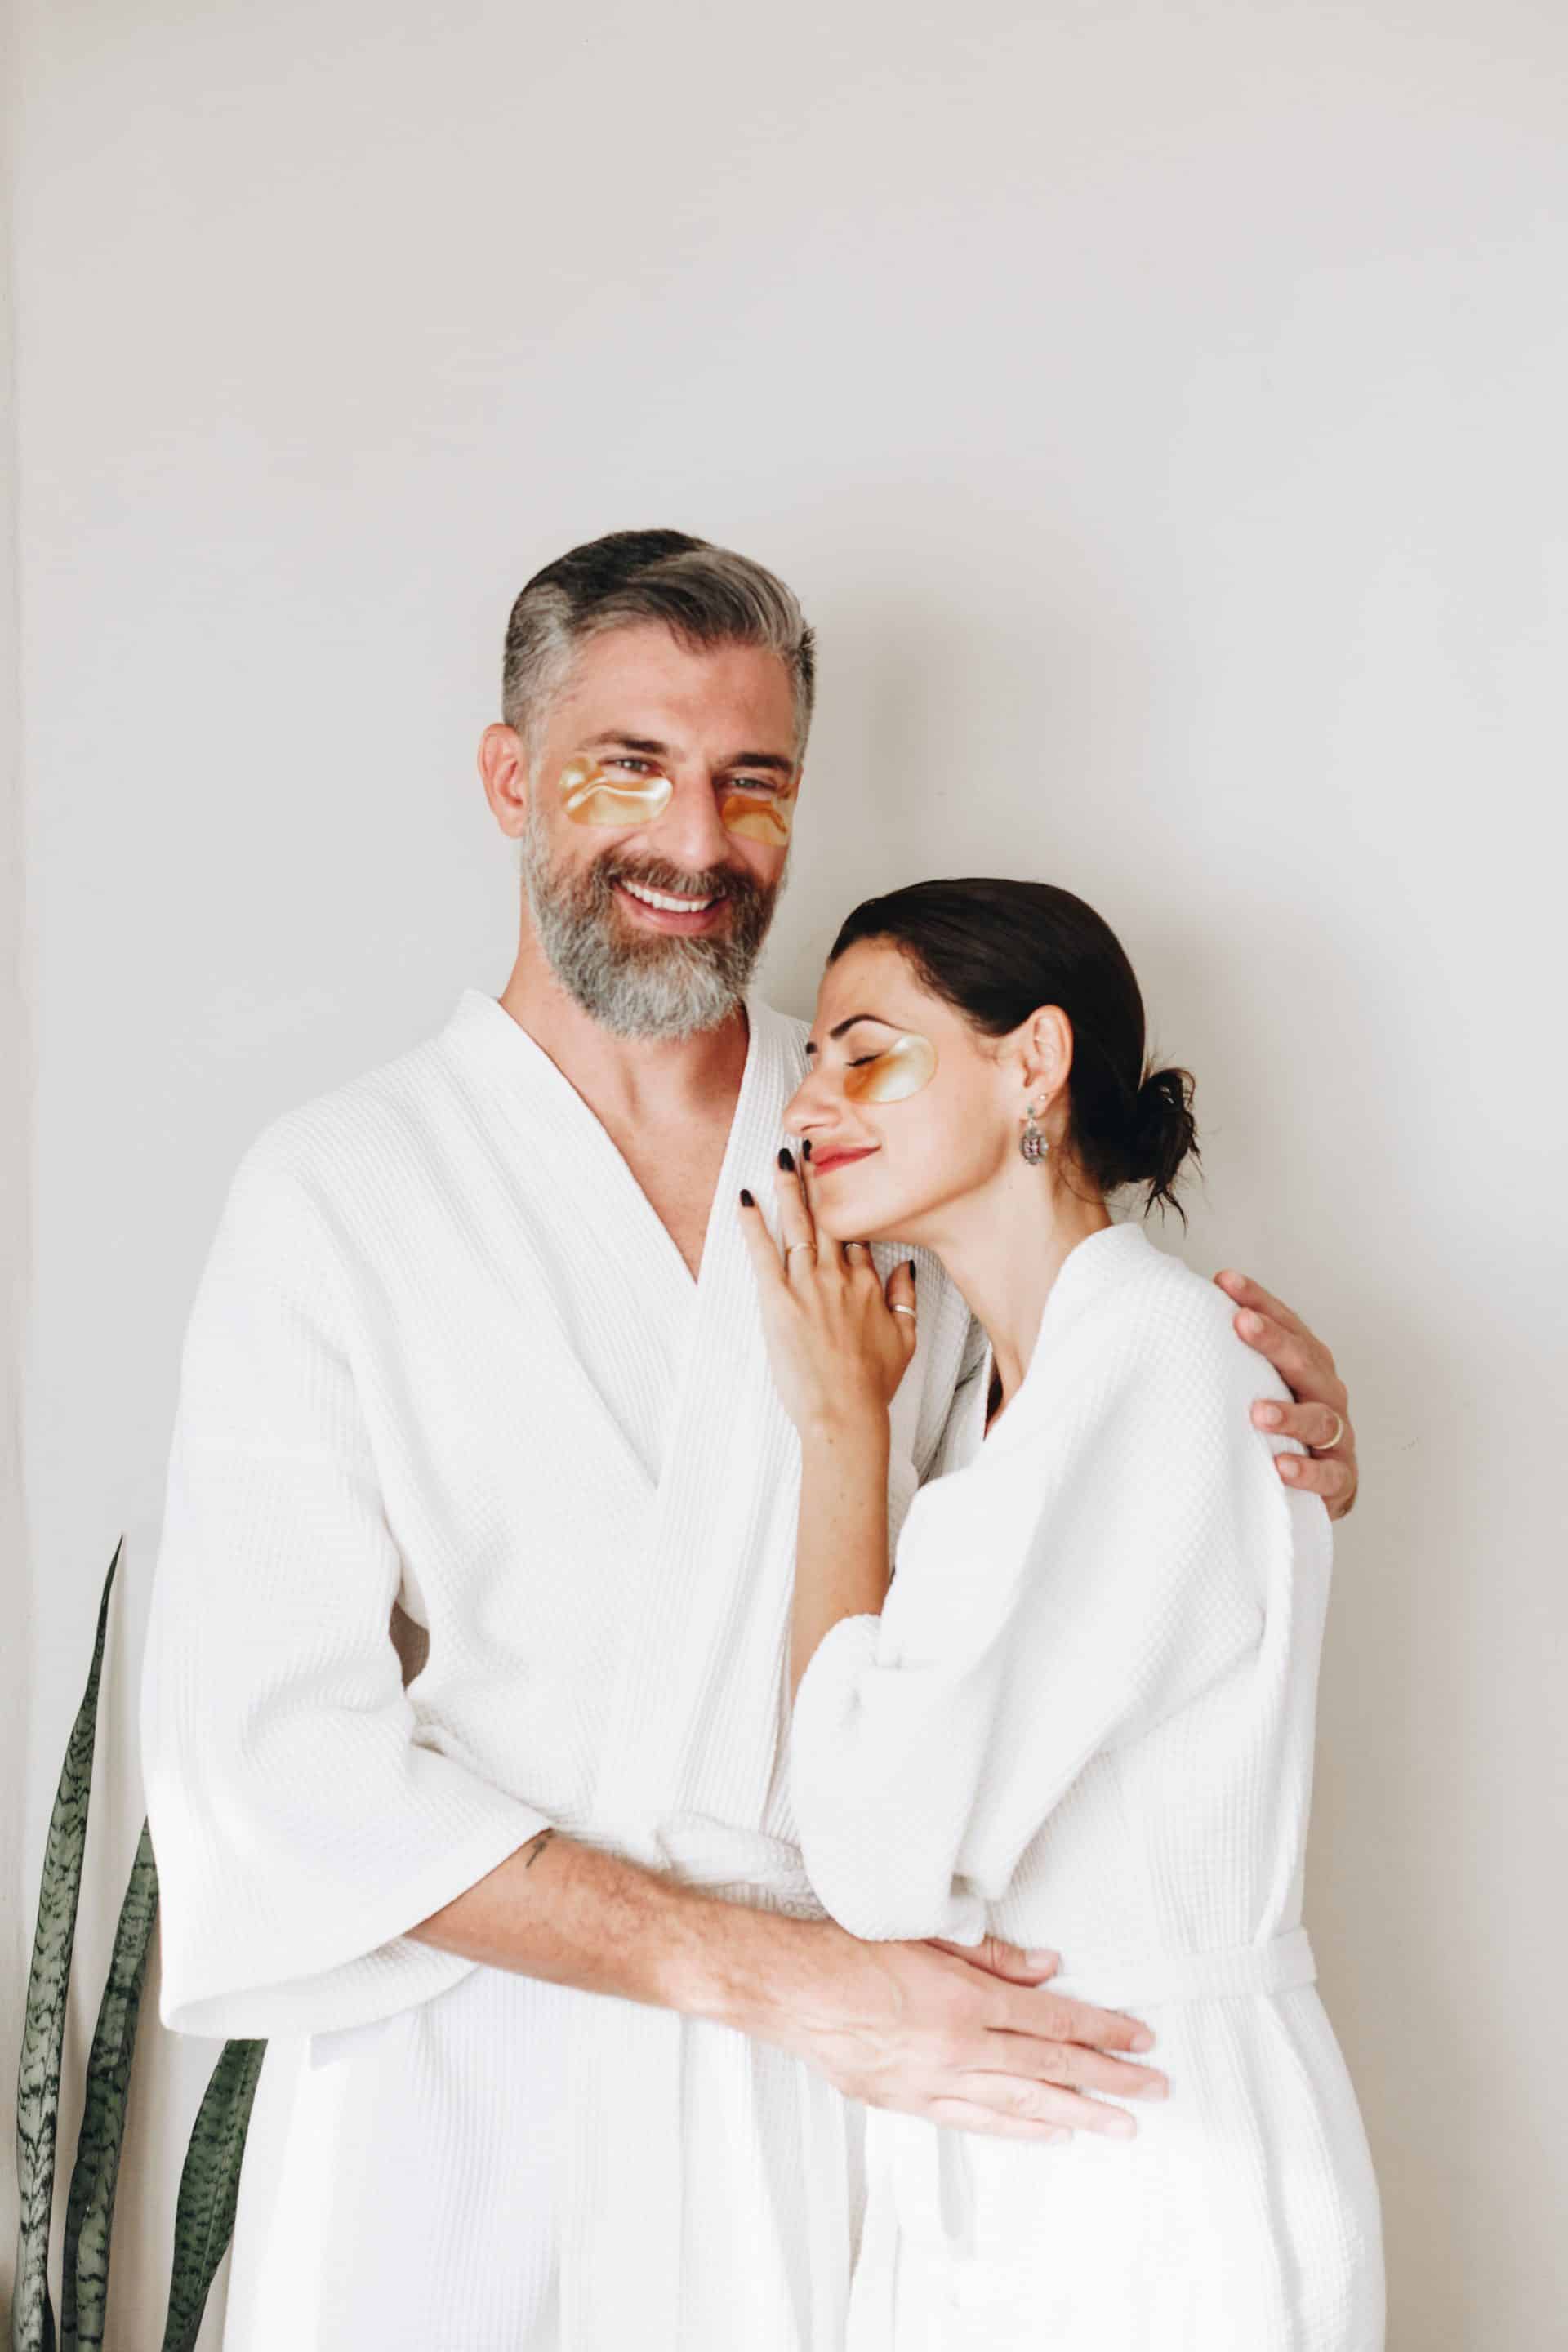 Middle-aged couple getting skin care